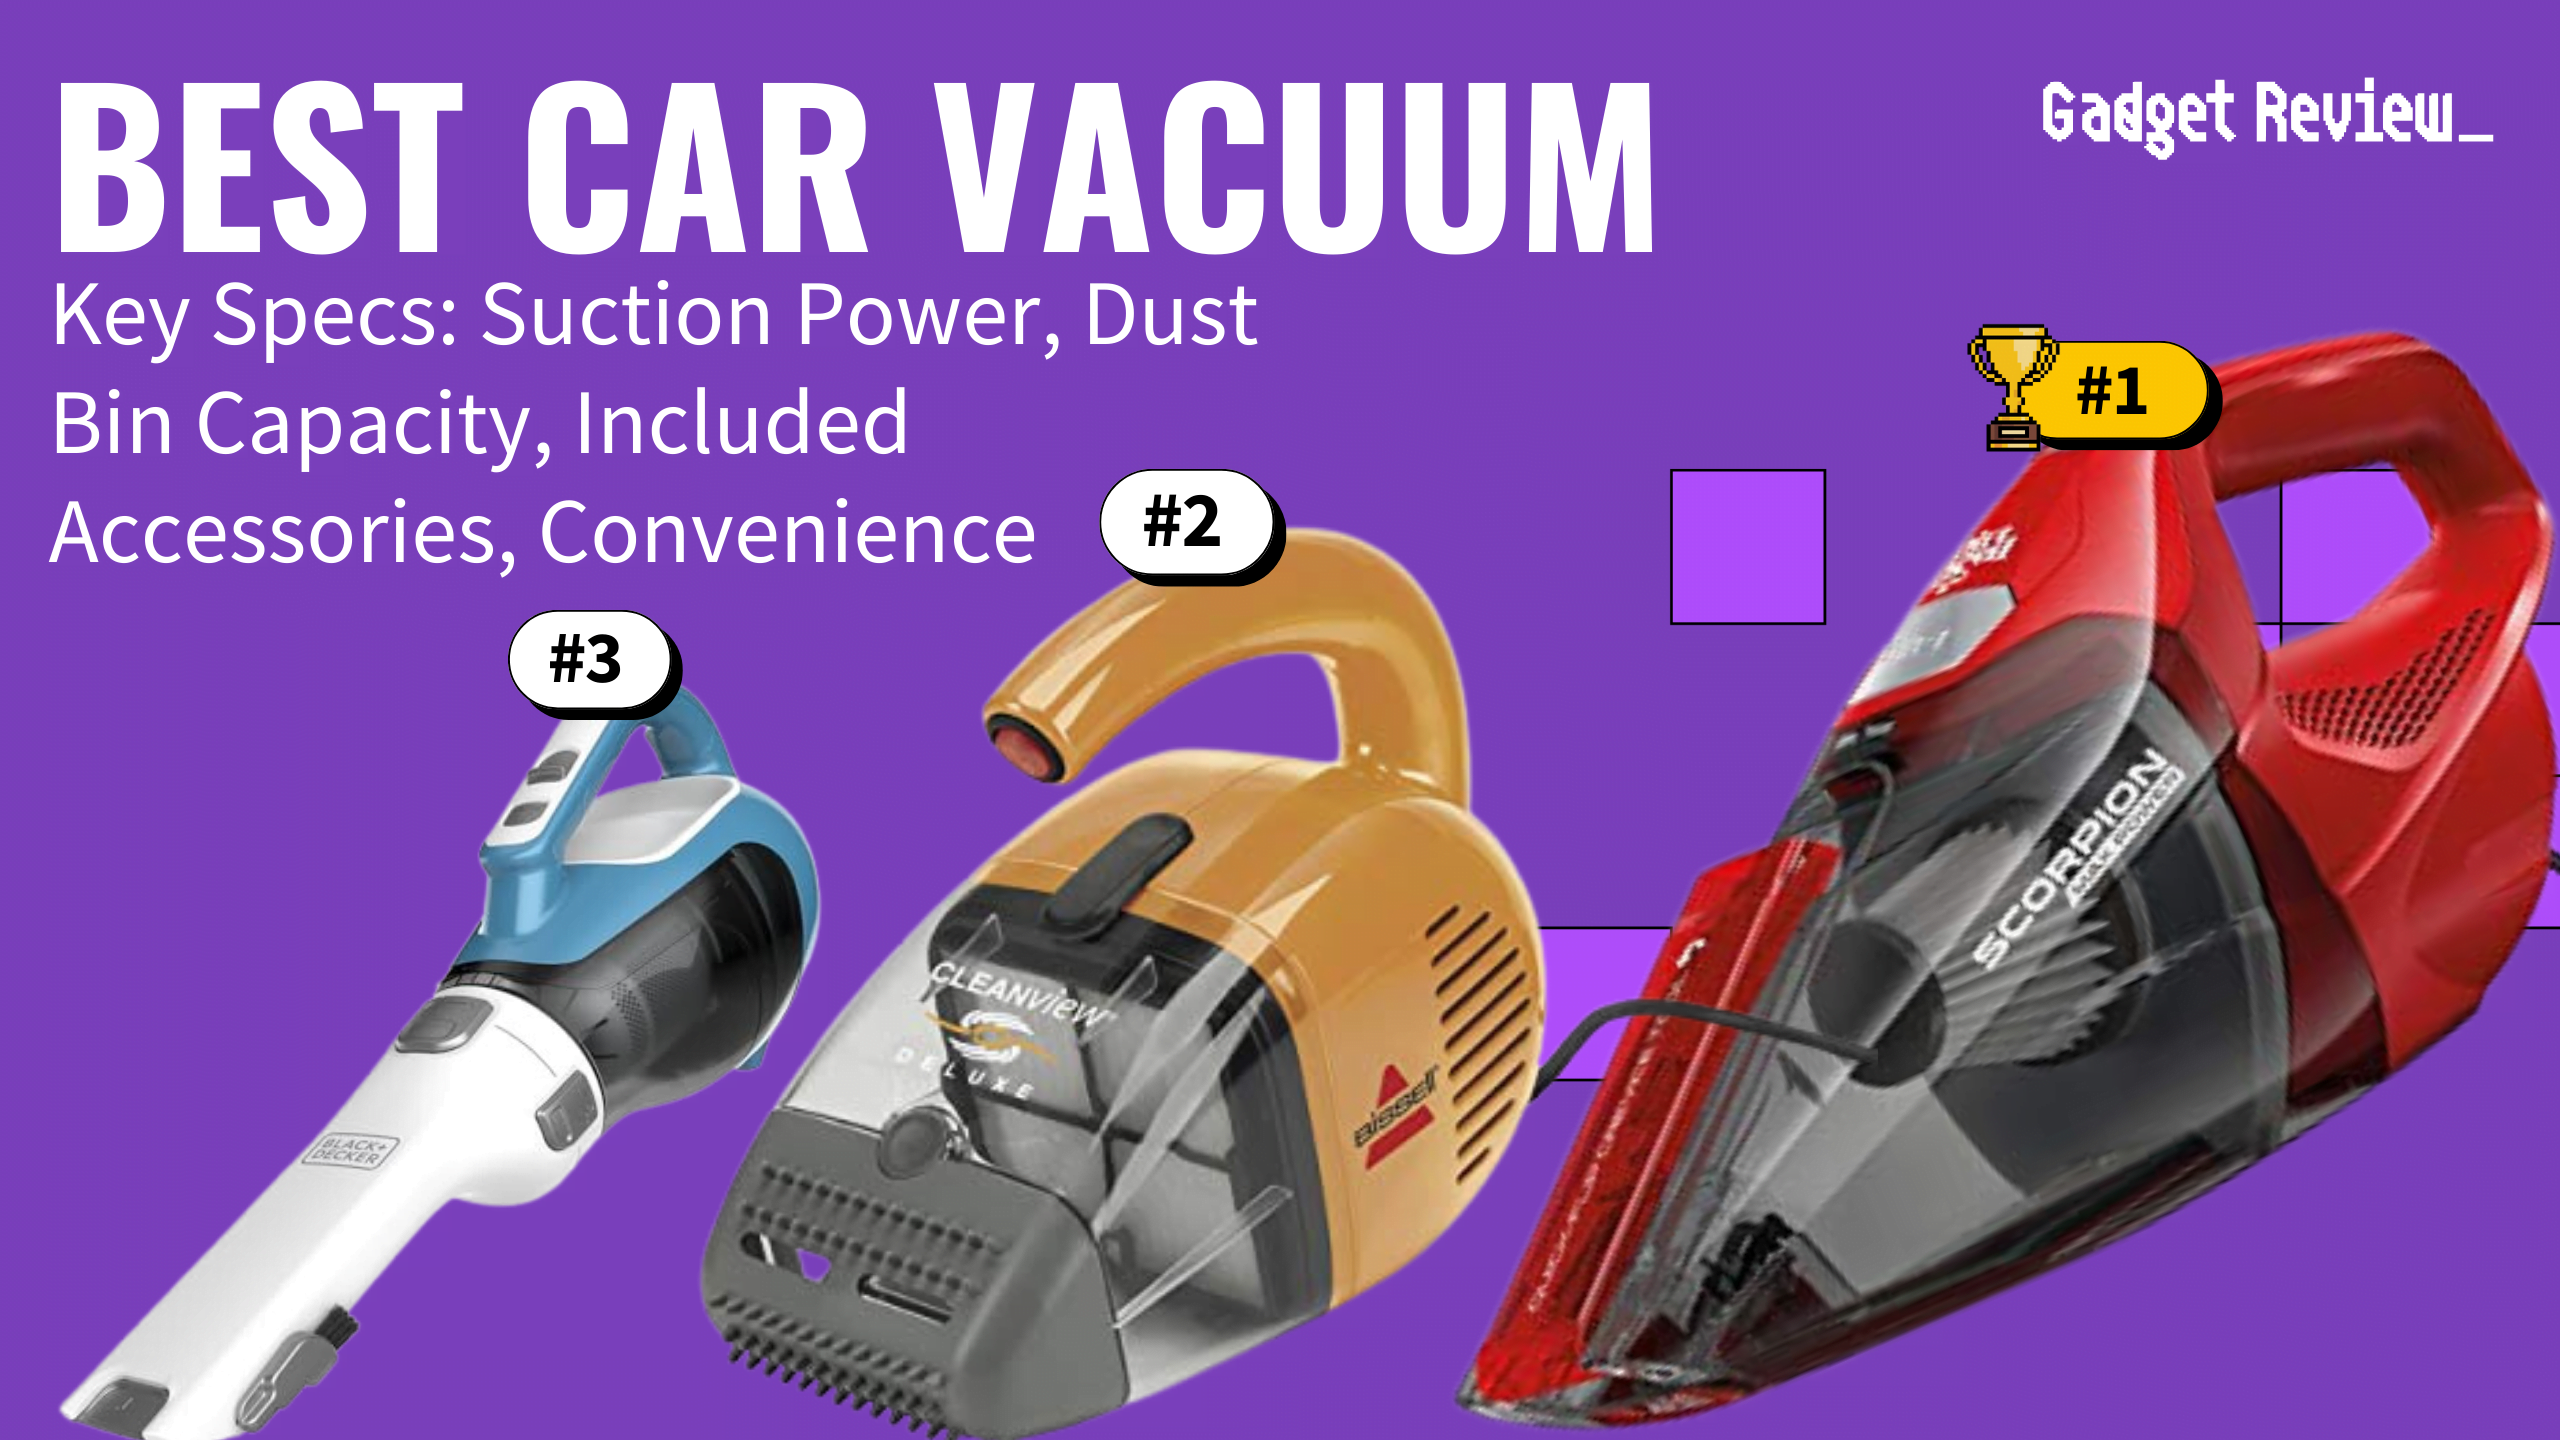 best car vacuum featured image that shows the top three best vacuum cleaner models